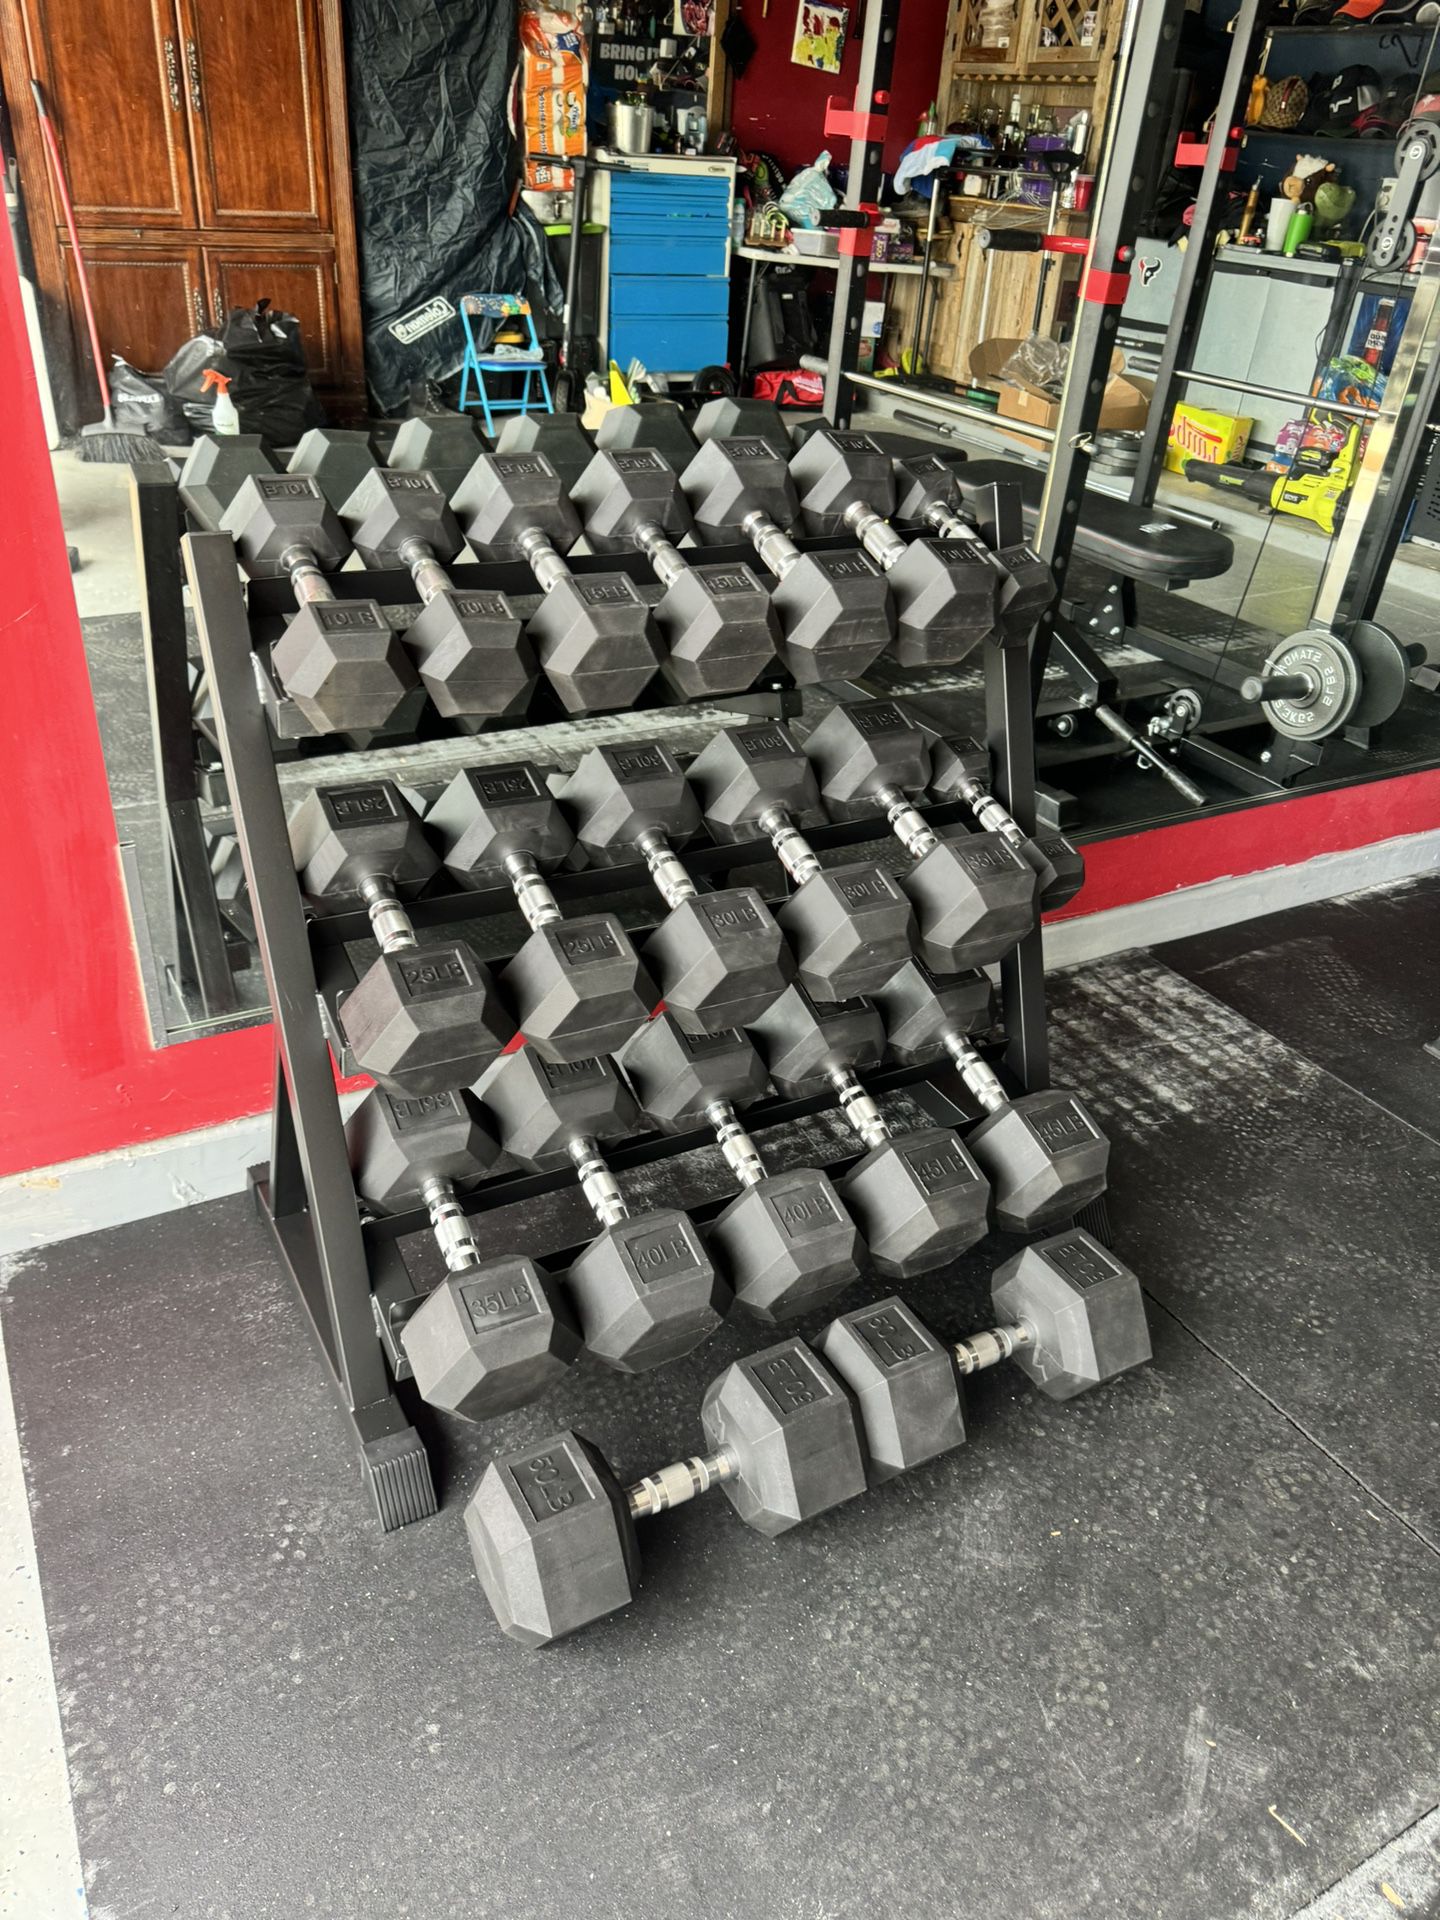 Dumbbell Set Brand New In The Box 5-50lbs 